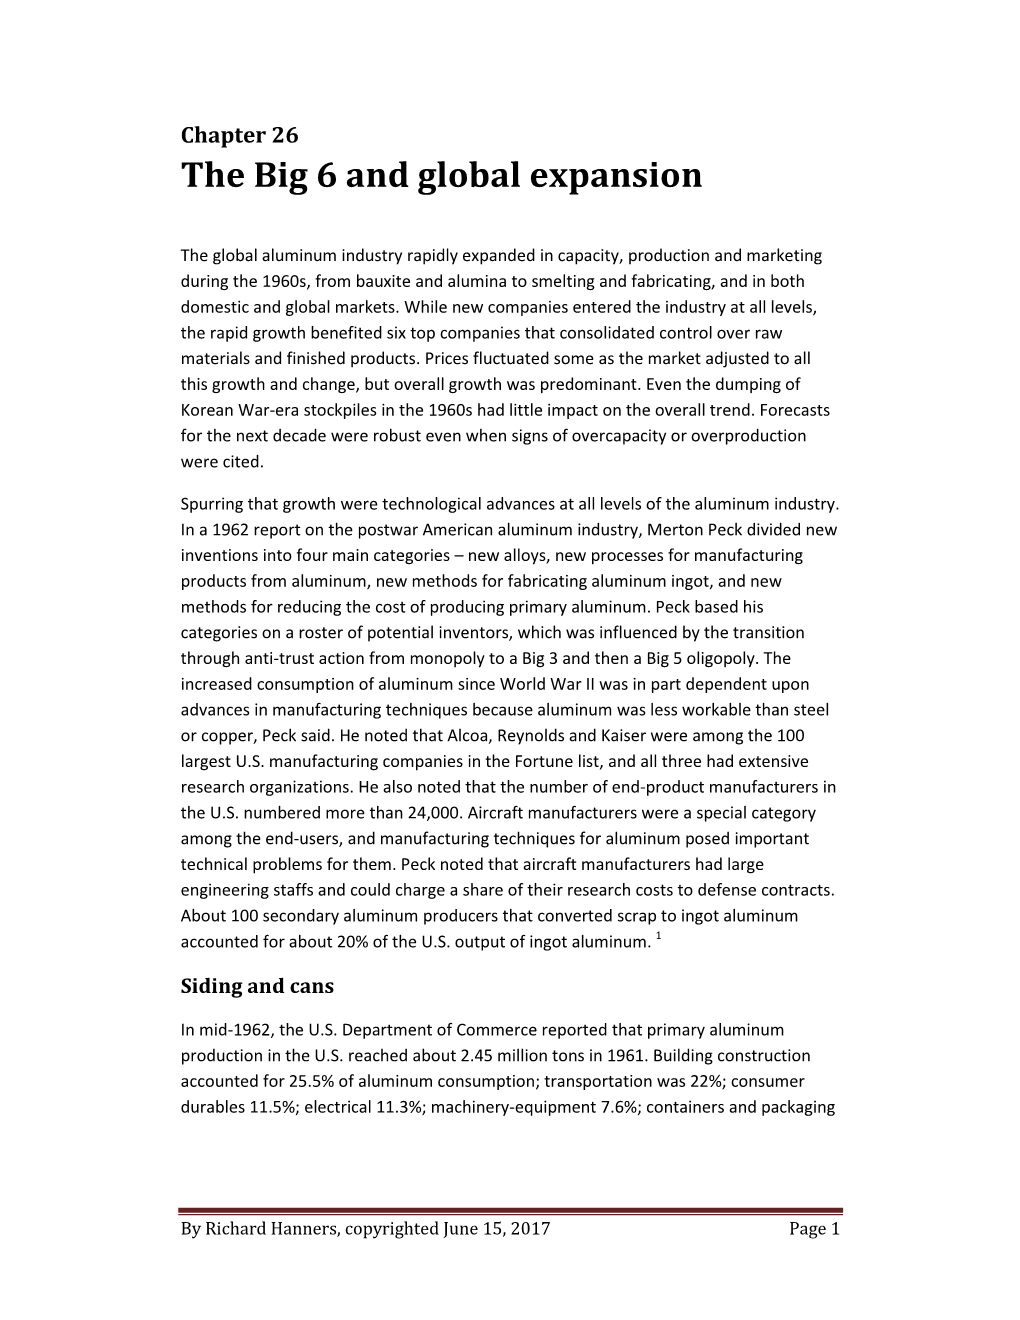 The Big 6 and Global Expansion